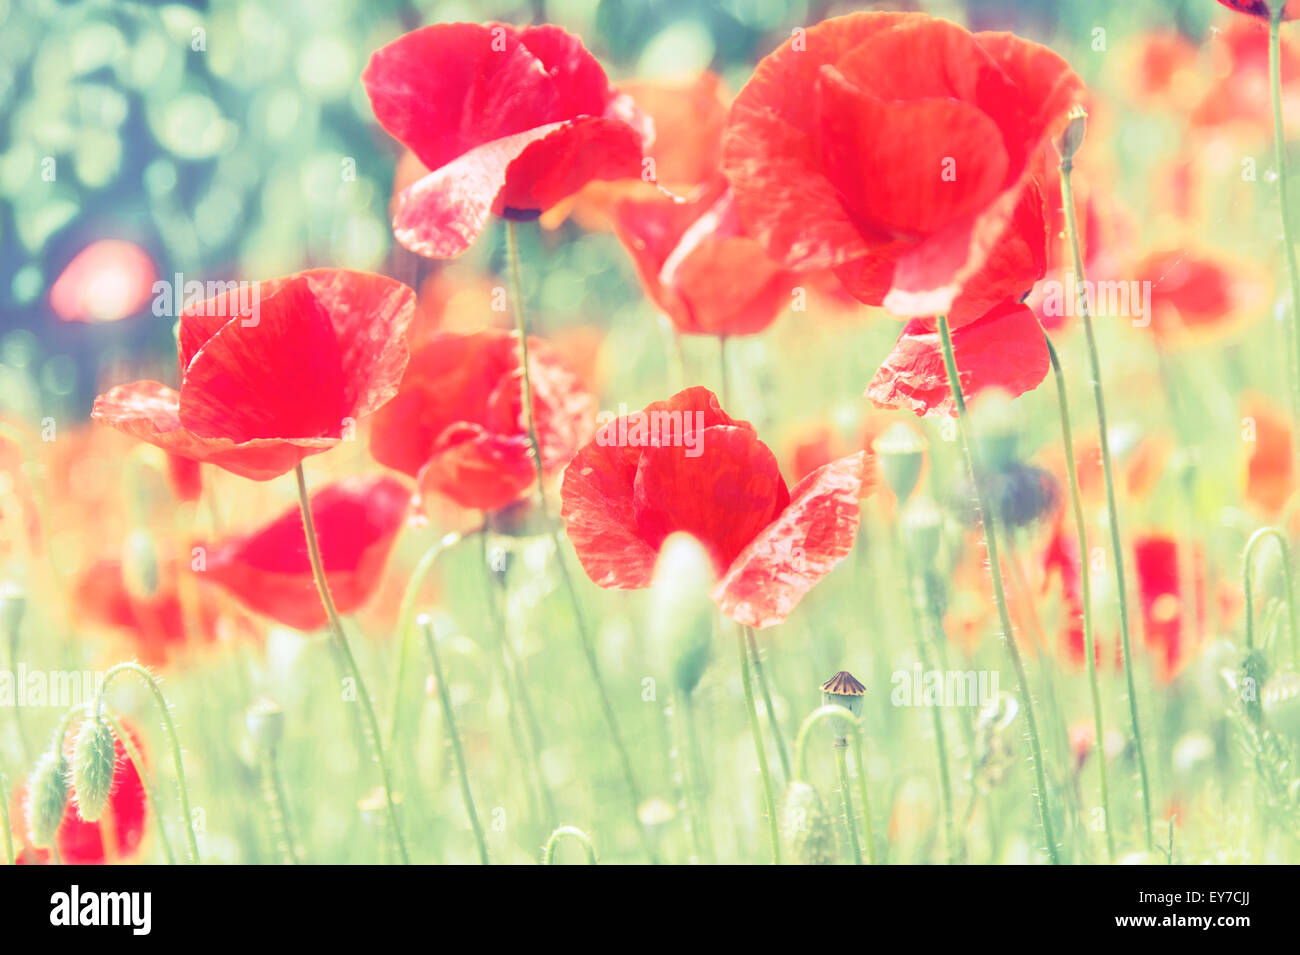 Low angle view of red poppies (Papaver rhoeas) Stock Photo